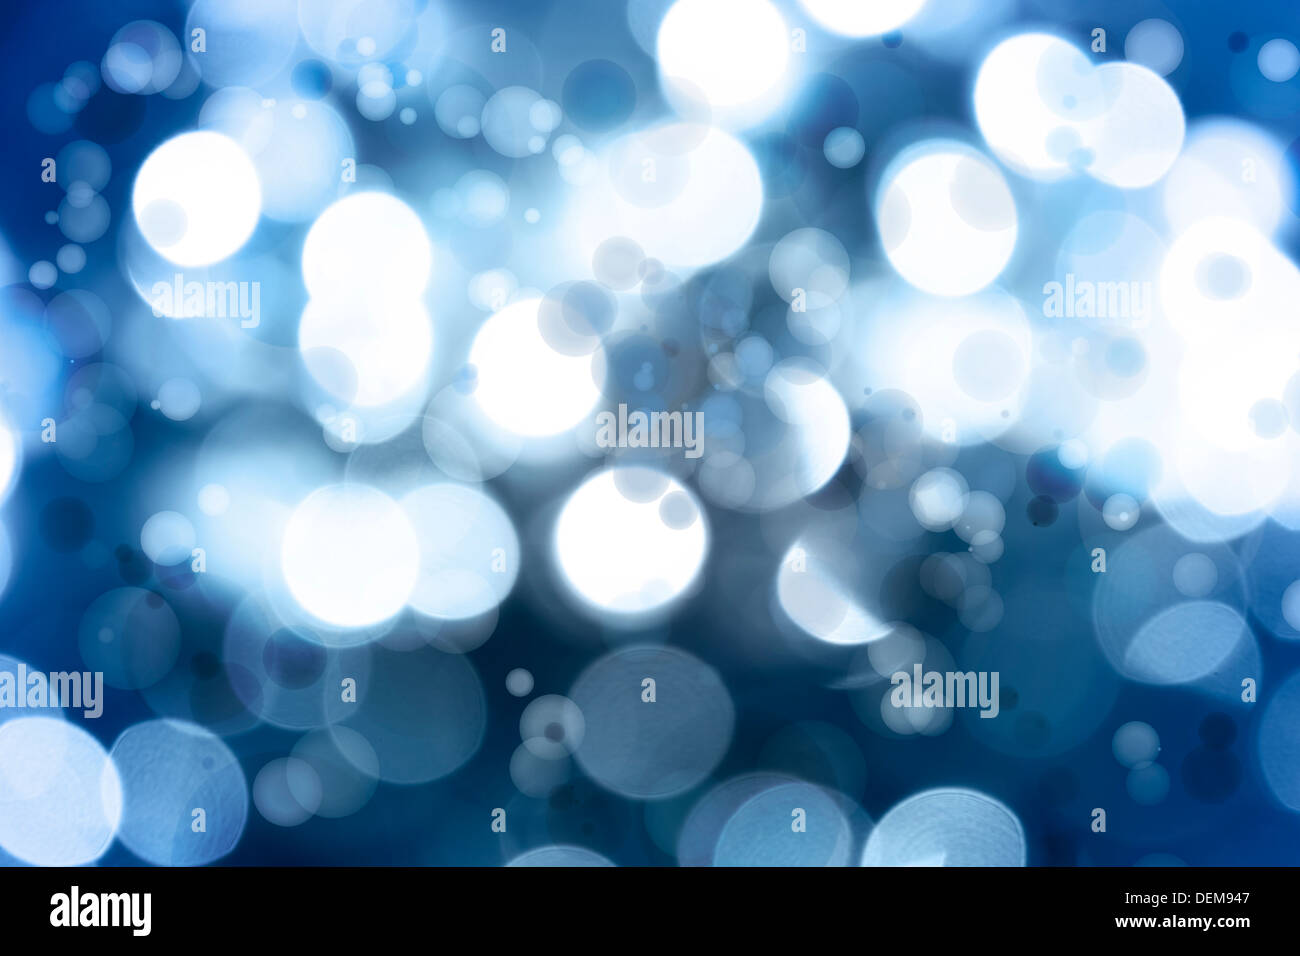 Circles abstract blue color background Stock Photo